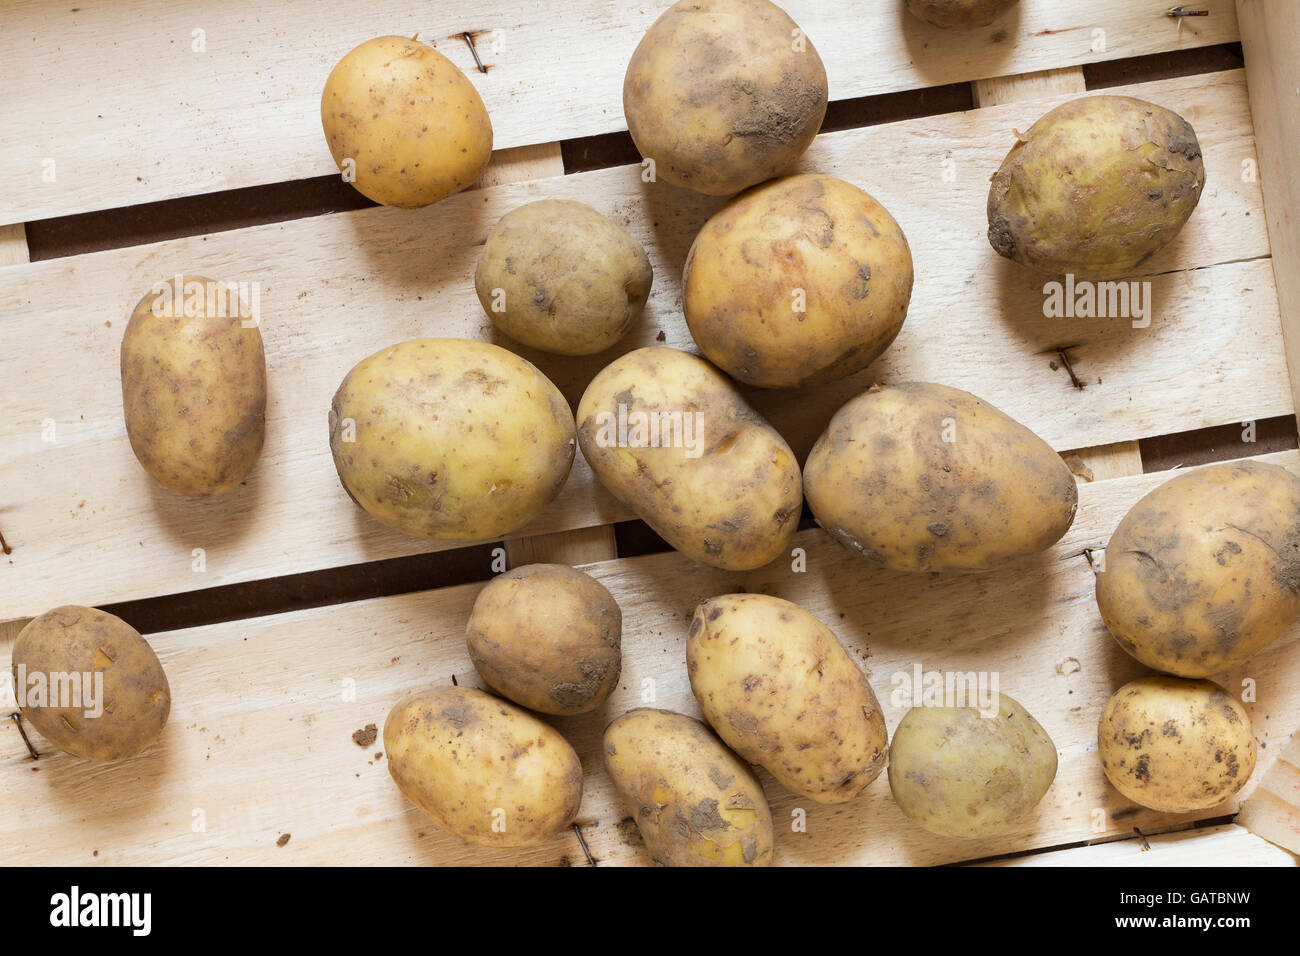 Various dirty potatoes arranged in a wooden box as a natural still life for organic healthy and vegetarian food Stock Photo